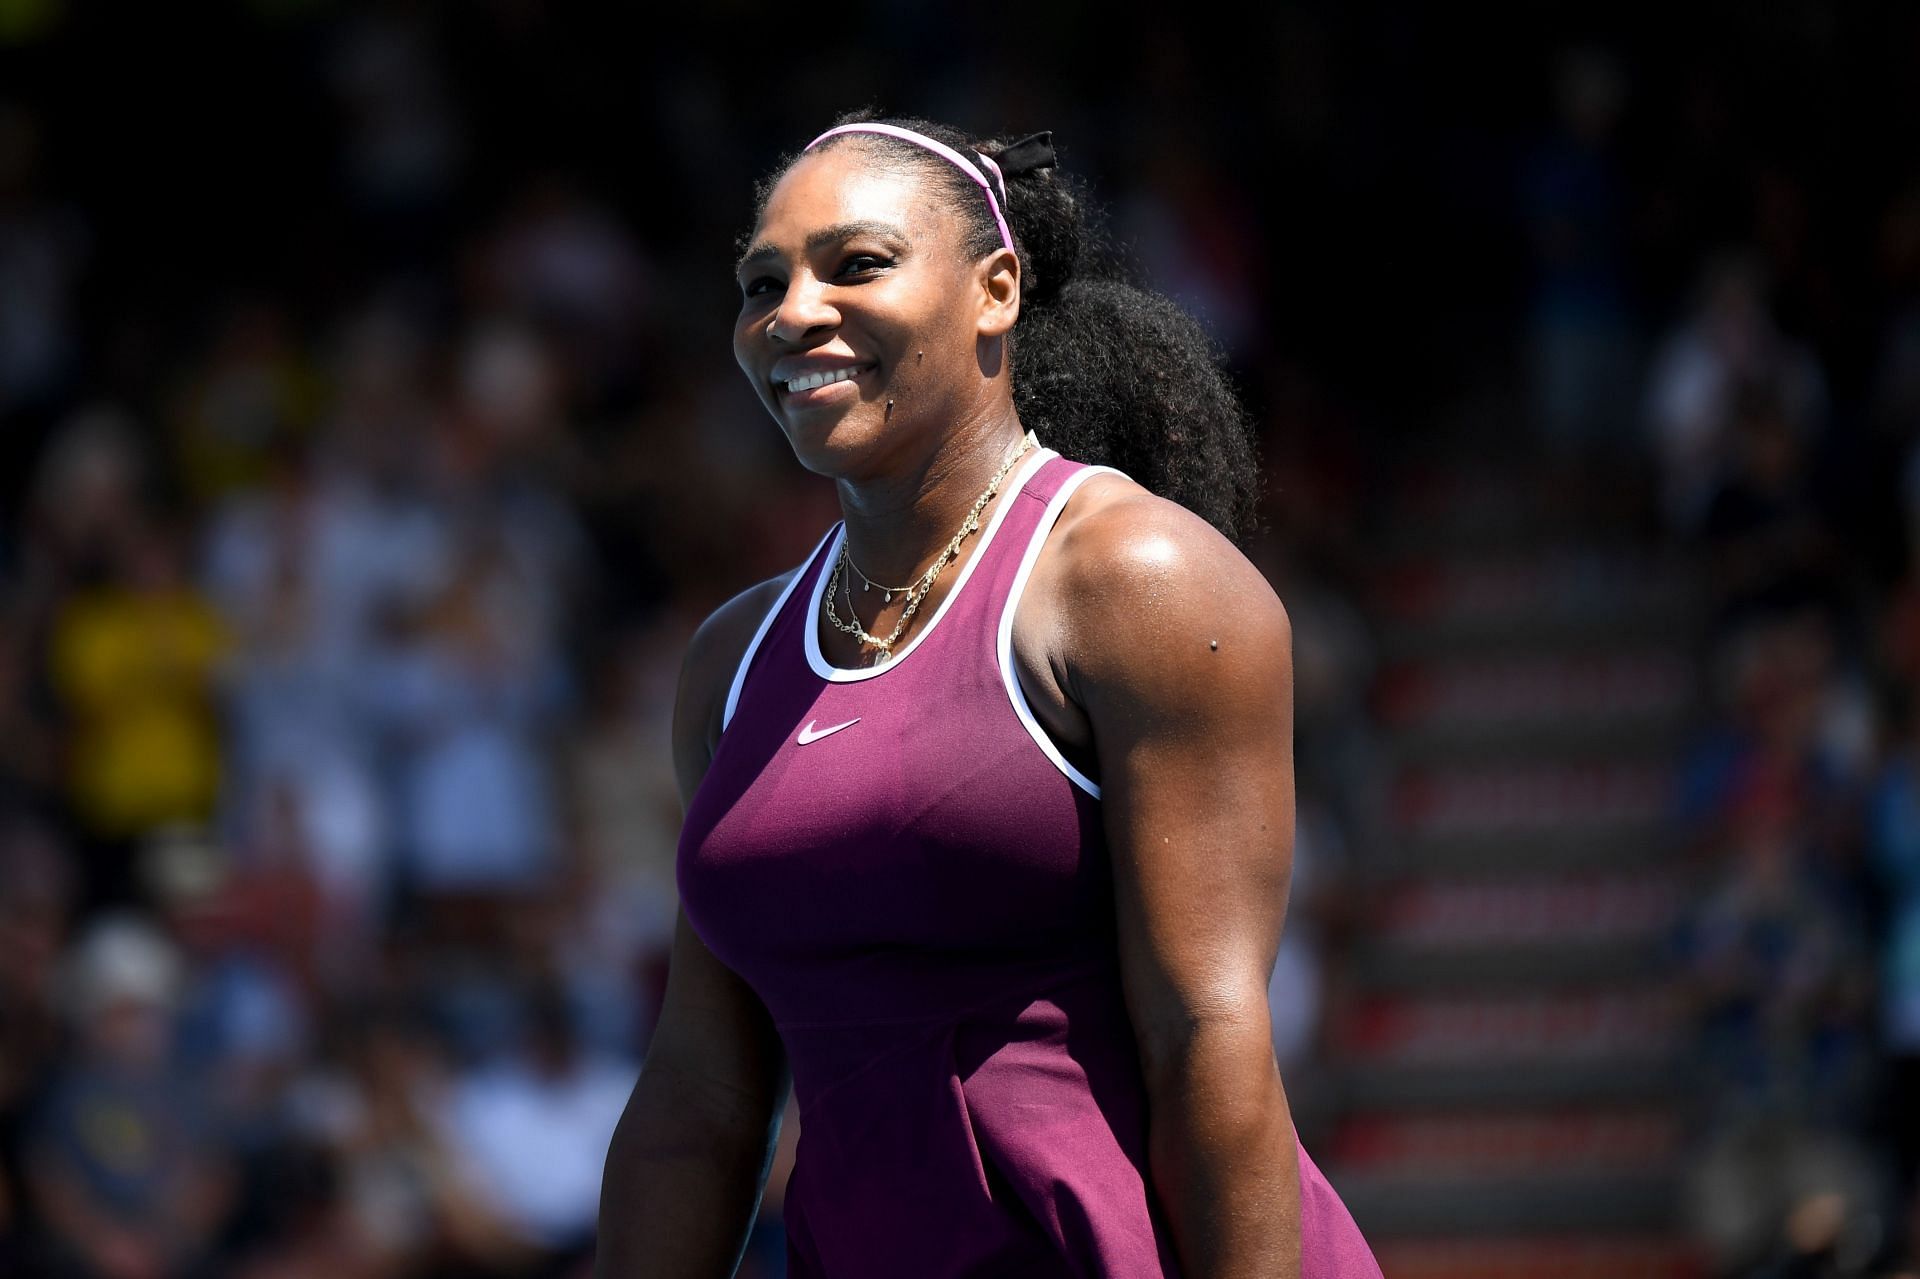 Serena Williams will retire from professional tennis after the 2022 US Open.